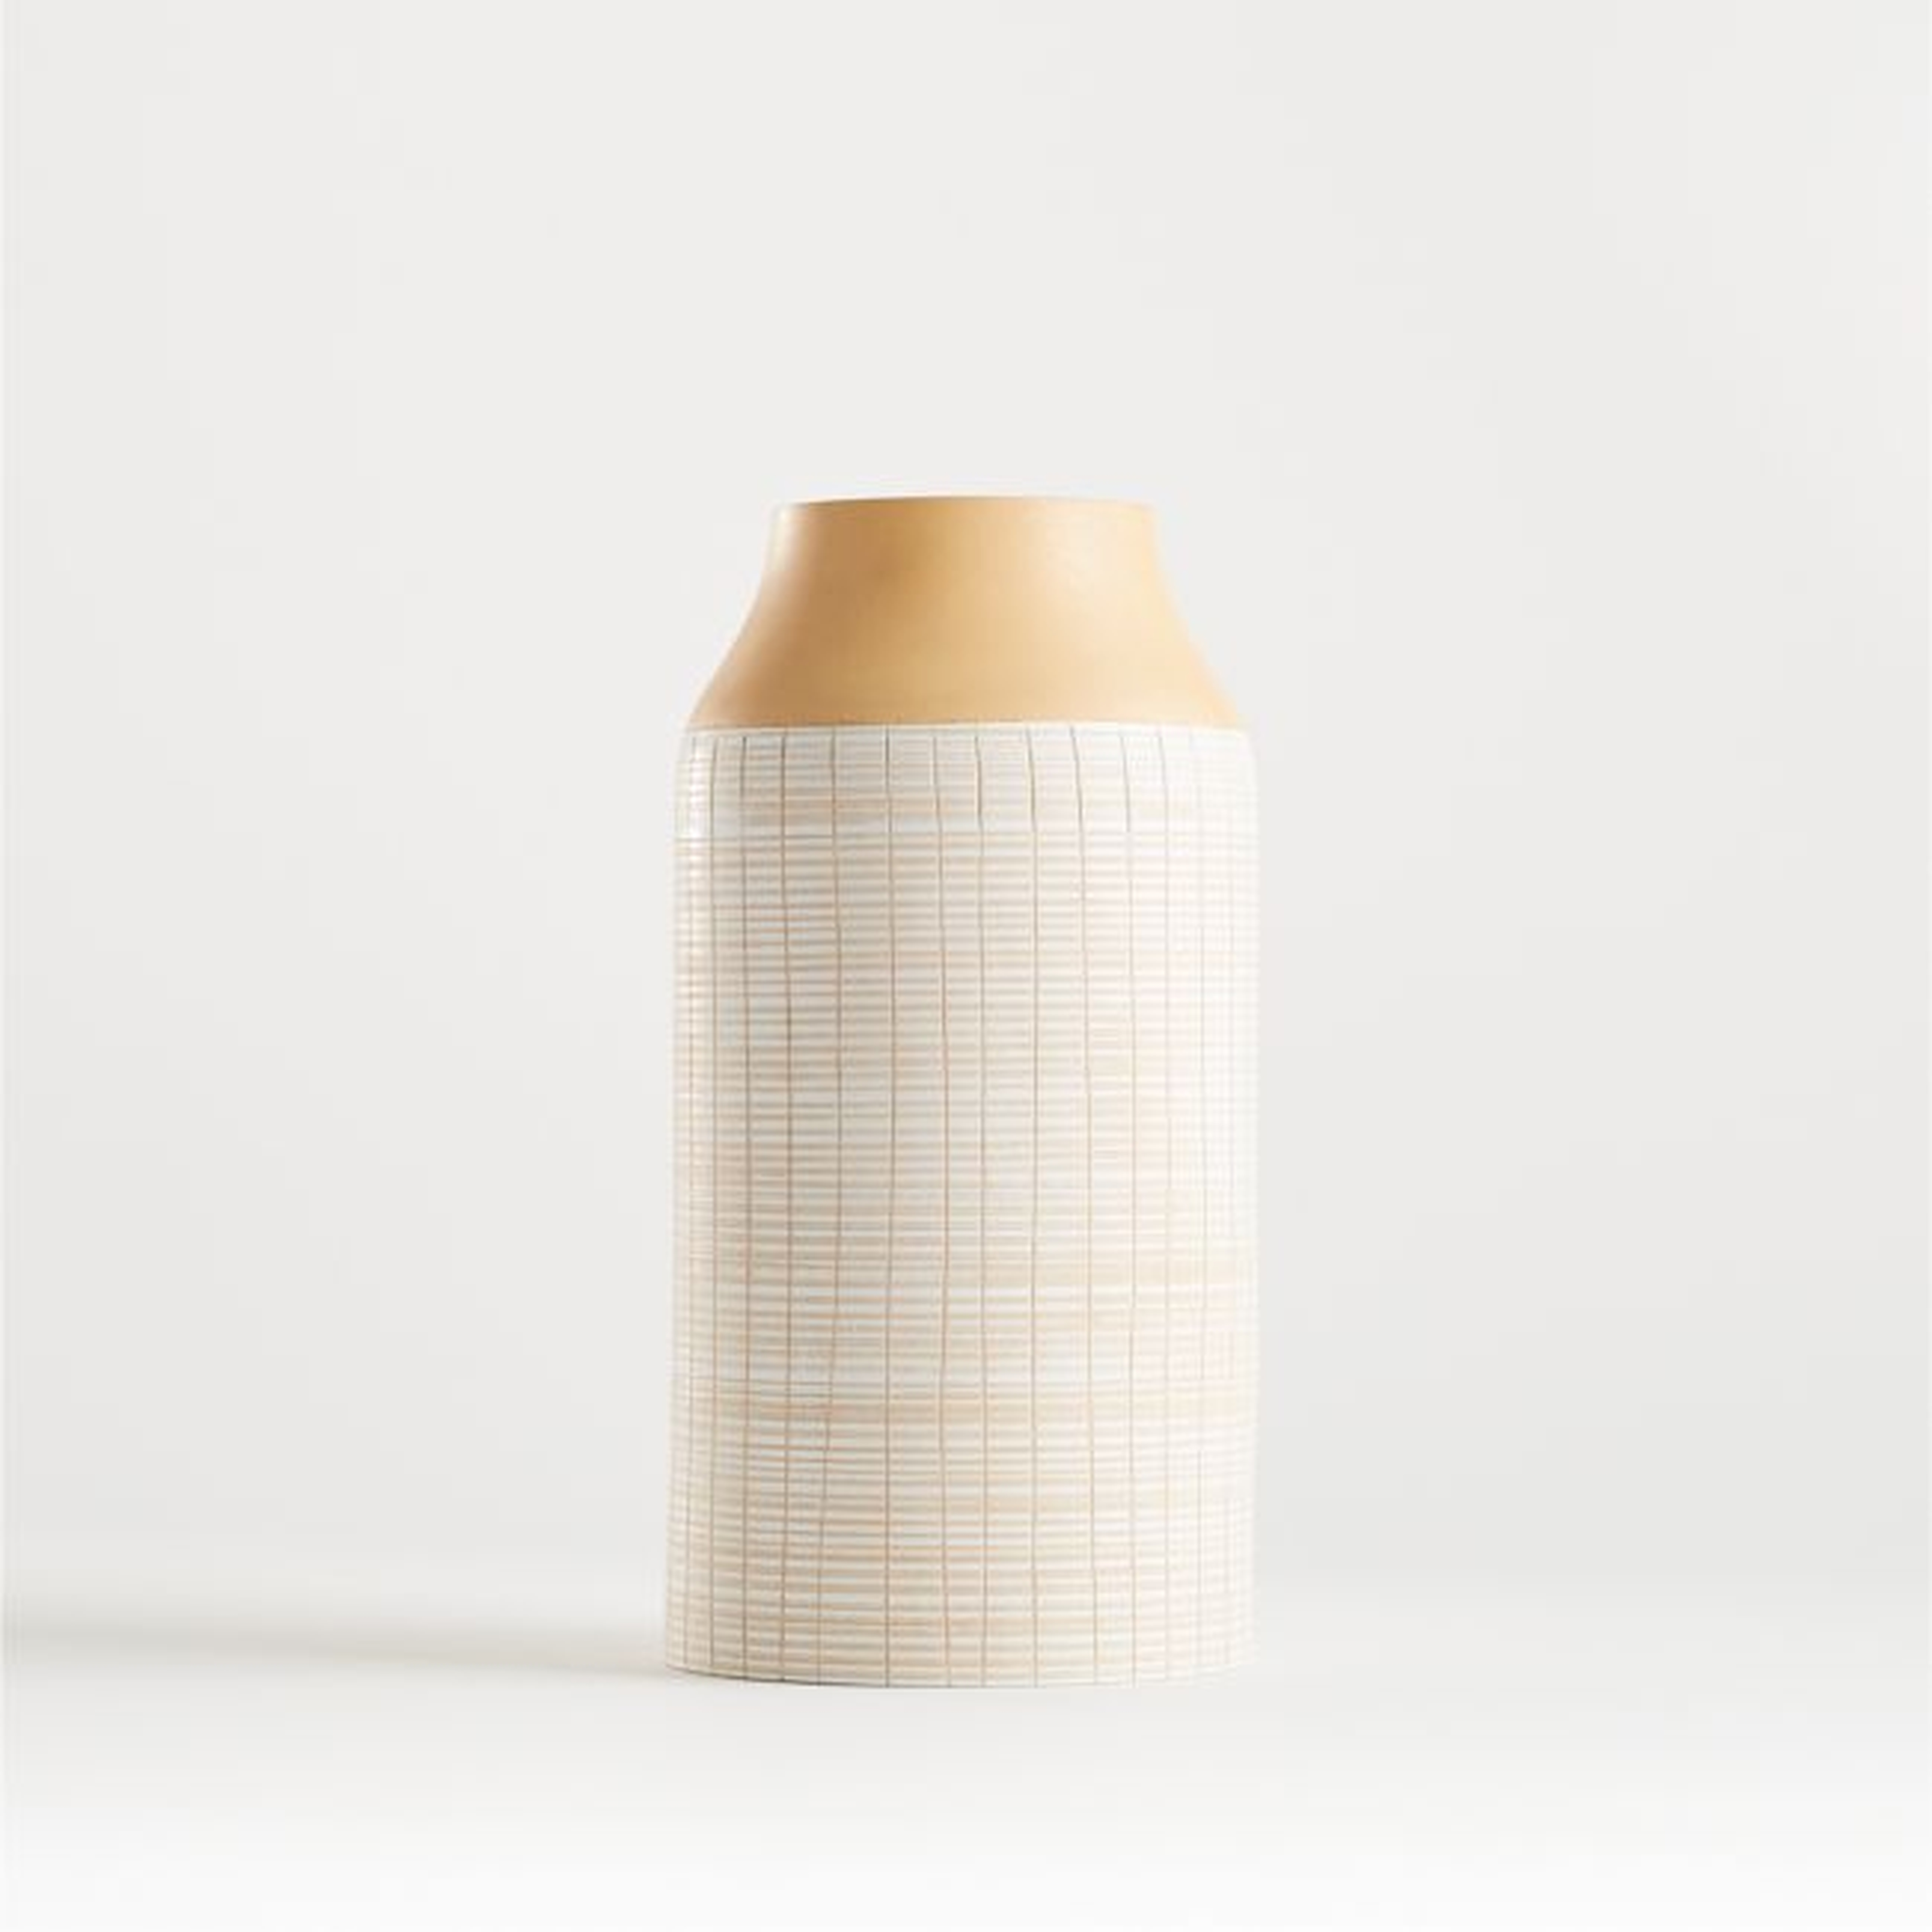 Soto White Wood Vase 12" - Crate and Barrel